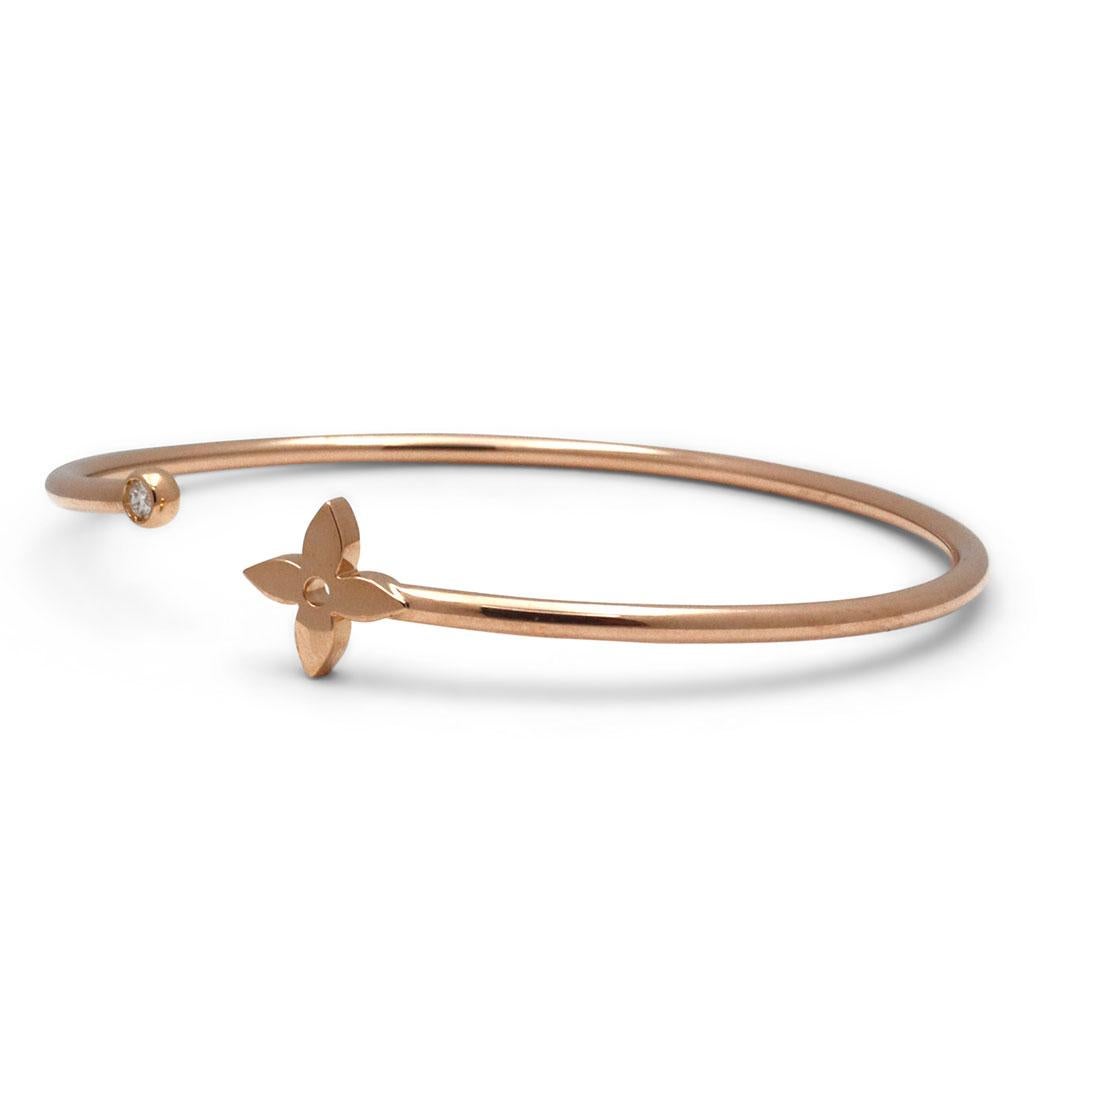 Authentic Louis Vuitton 'Idylle Blossom Twist' bracelet crafted in 18 karat rose gold.  The split bangle features the iconic Louis Vuitton monogram flower on one end and is bezel set with a round brilliant diamond weighing approximately .05 carats